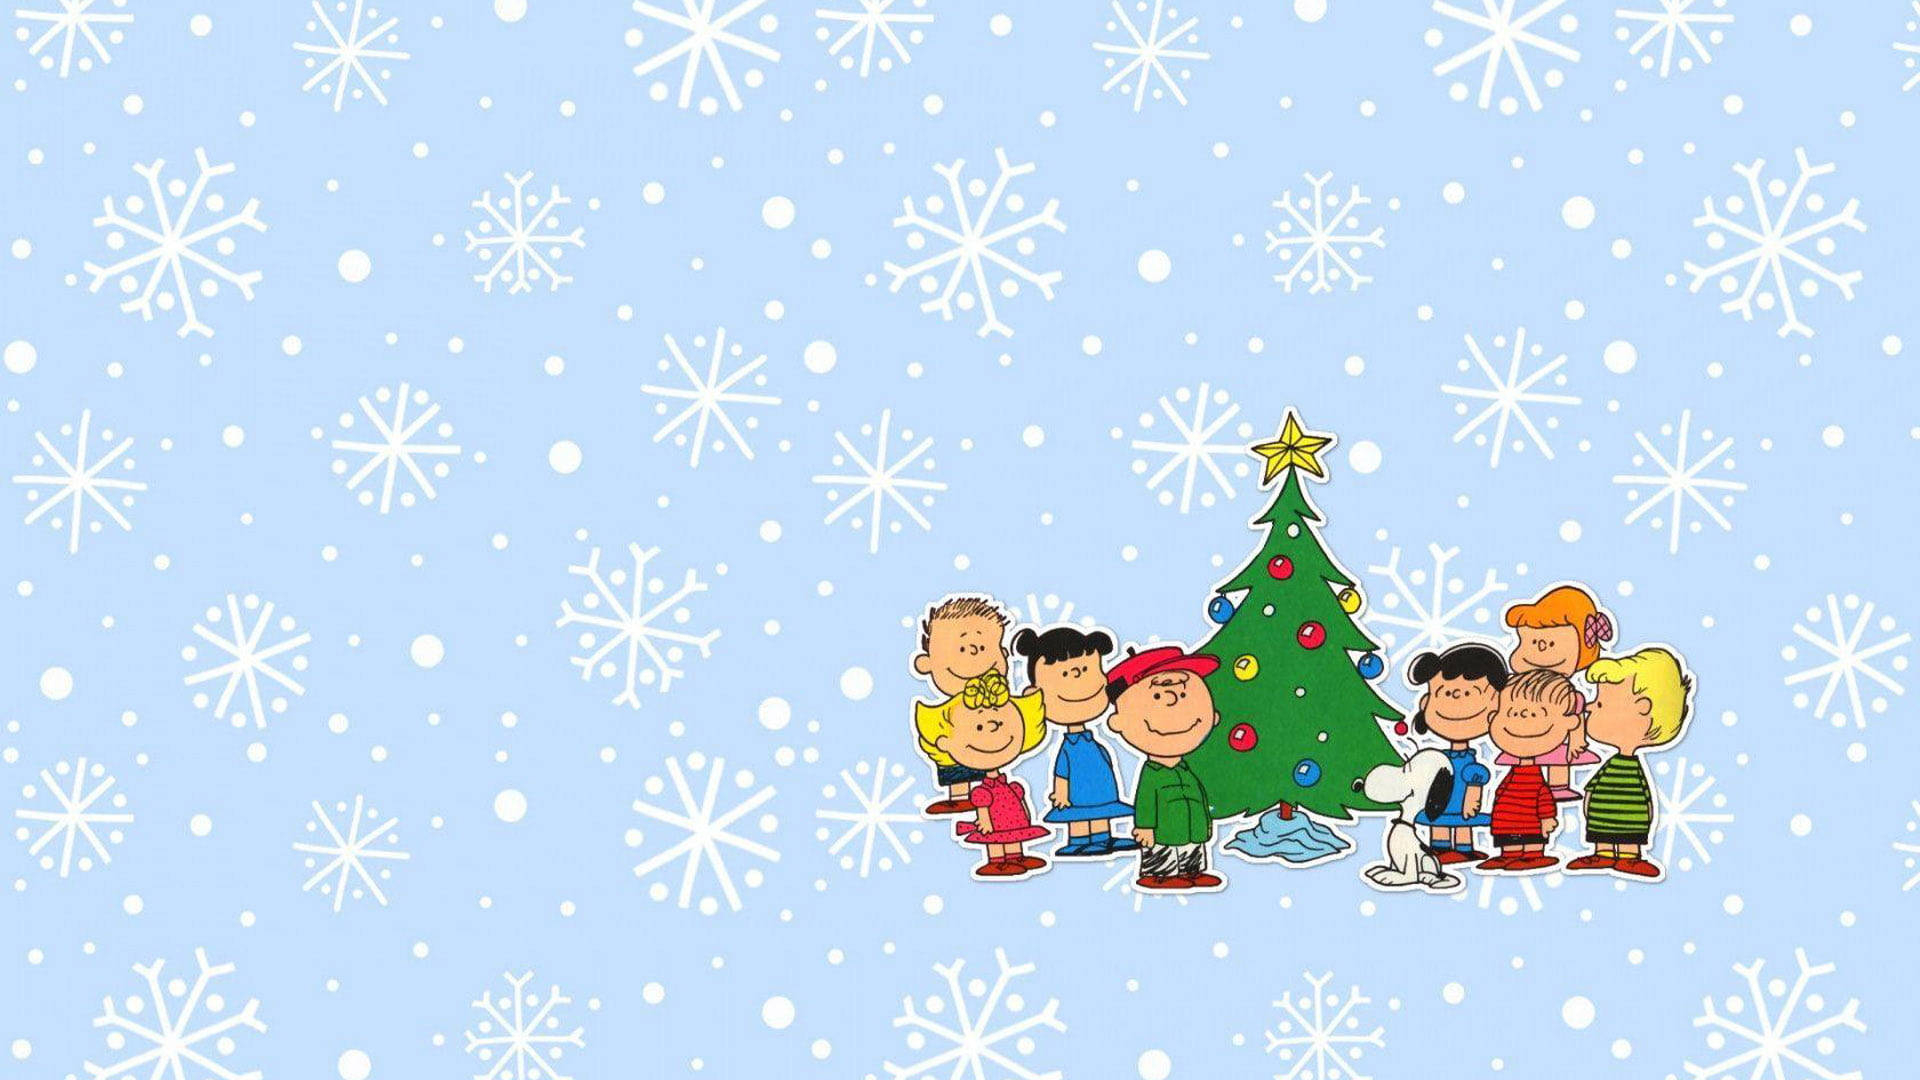 1920x1080 Download Snoopy Christmas Snowflakes Wallpaper